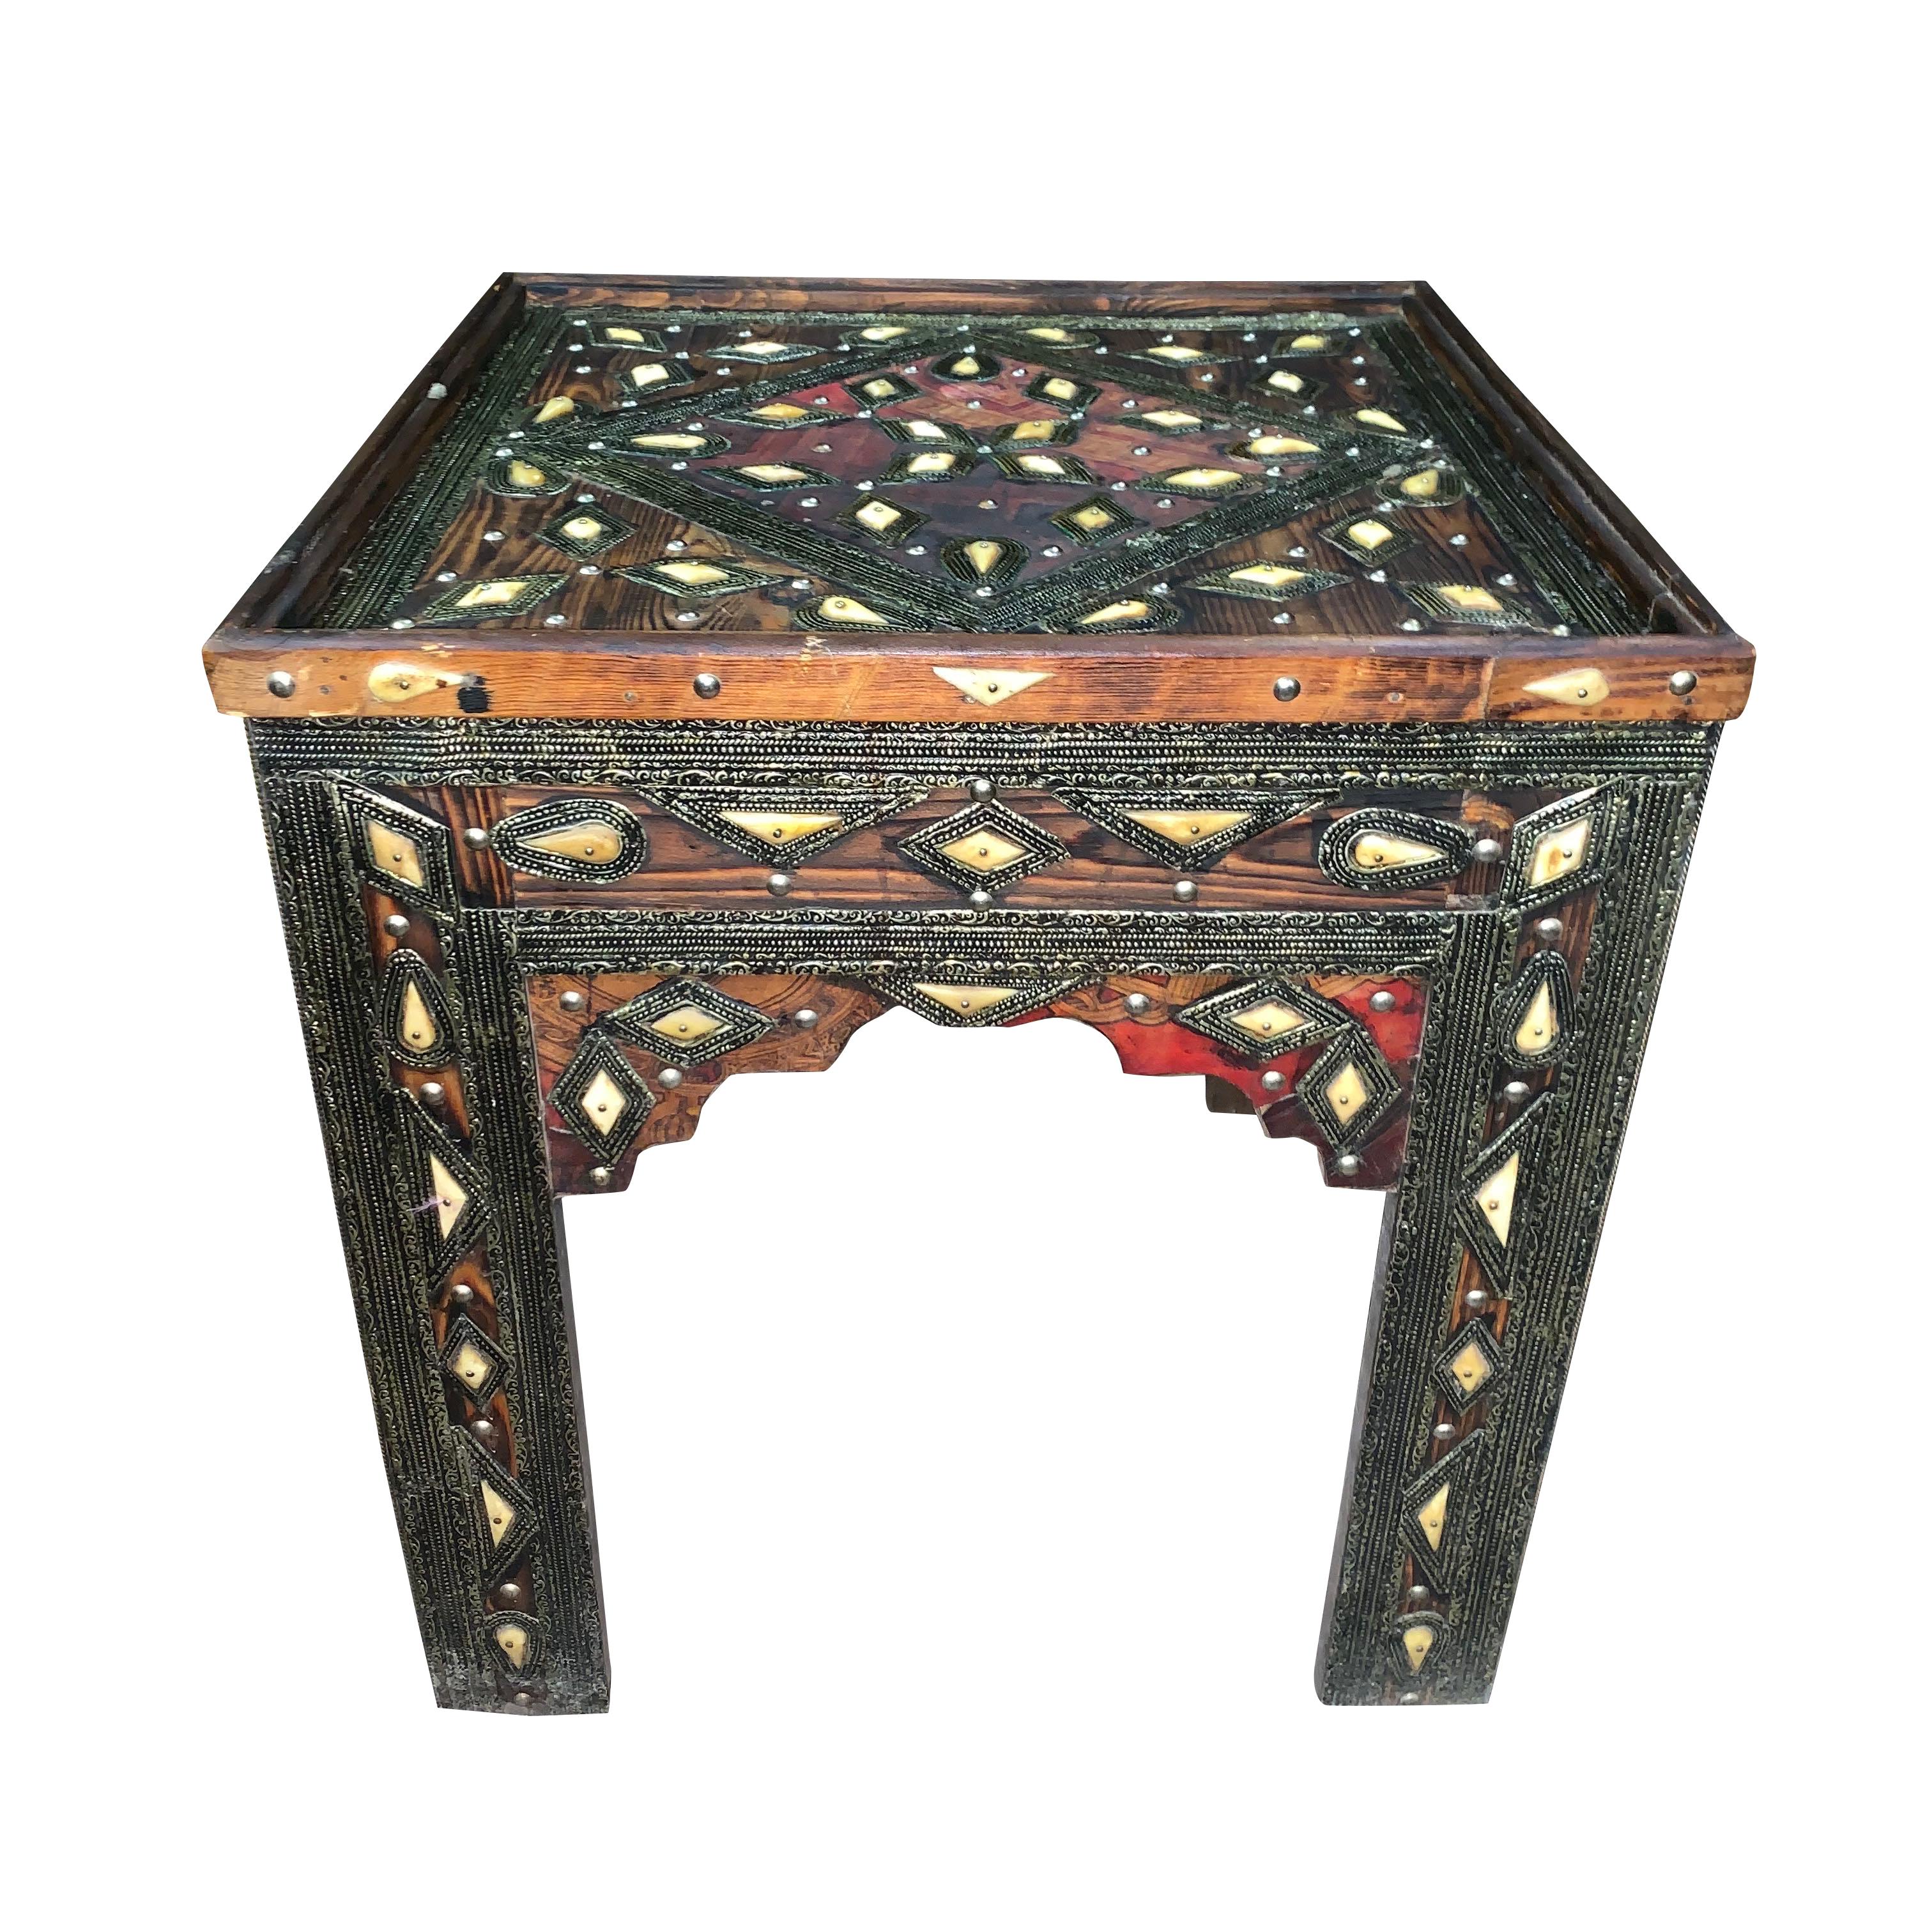 1920s from the Oujda region of Morocco a glass top square side table.
Decorative bone and silver inlay details throughout the table.
Henna dyed goatskin accents on cedarwood.
